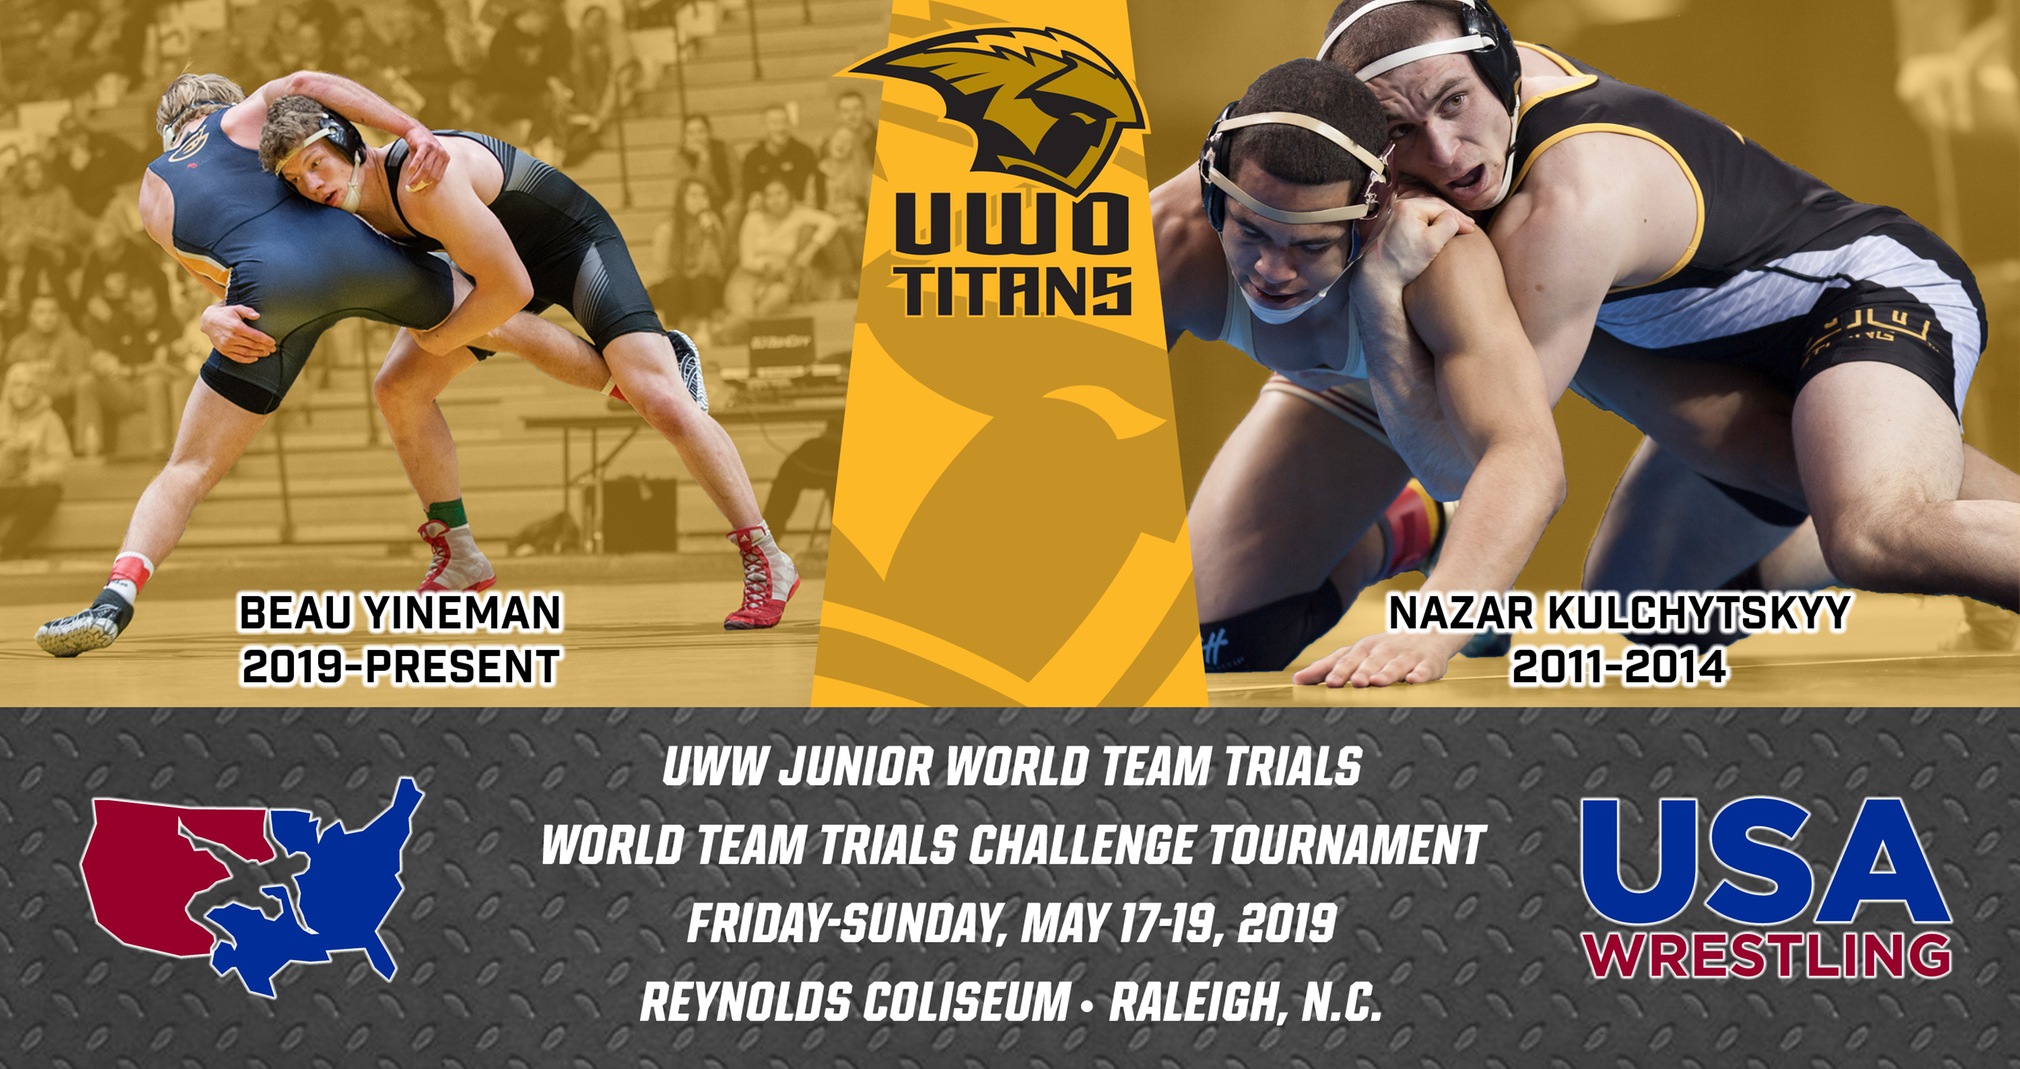 USA Wrestling Tournaments To Include One Current, One Former Titan